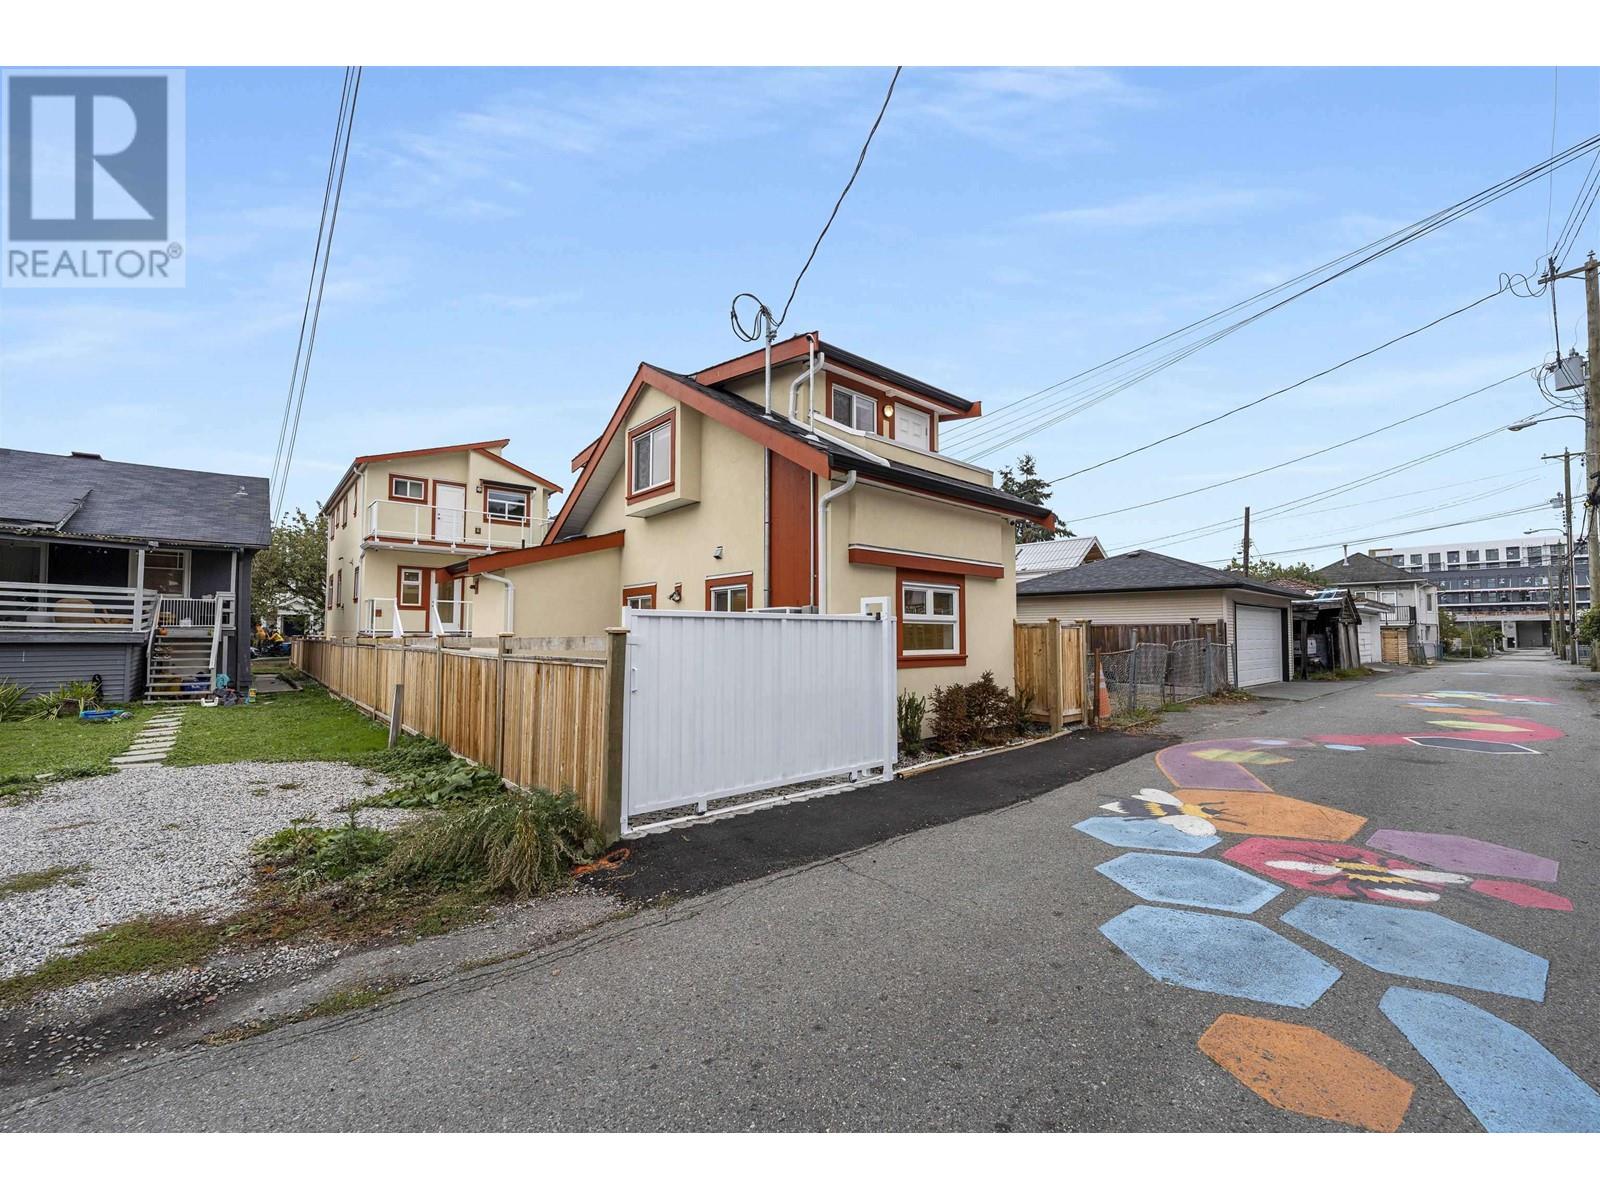 Listing Picture 35 of 37 : 530 E 18TH AVENUE, Vancouver / 溫哥華 - 魯藝地產 Yvonne Lu Group - MLS Medallion Club Member